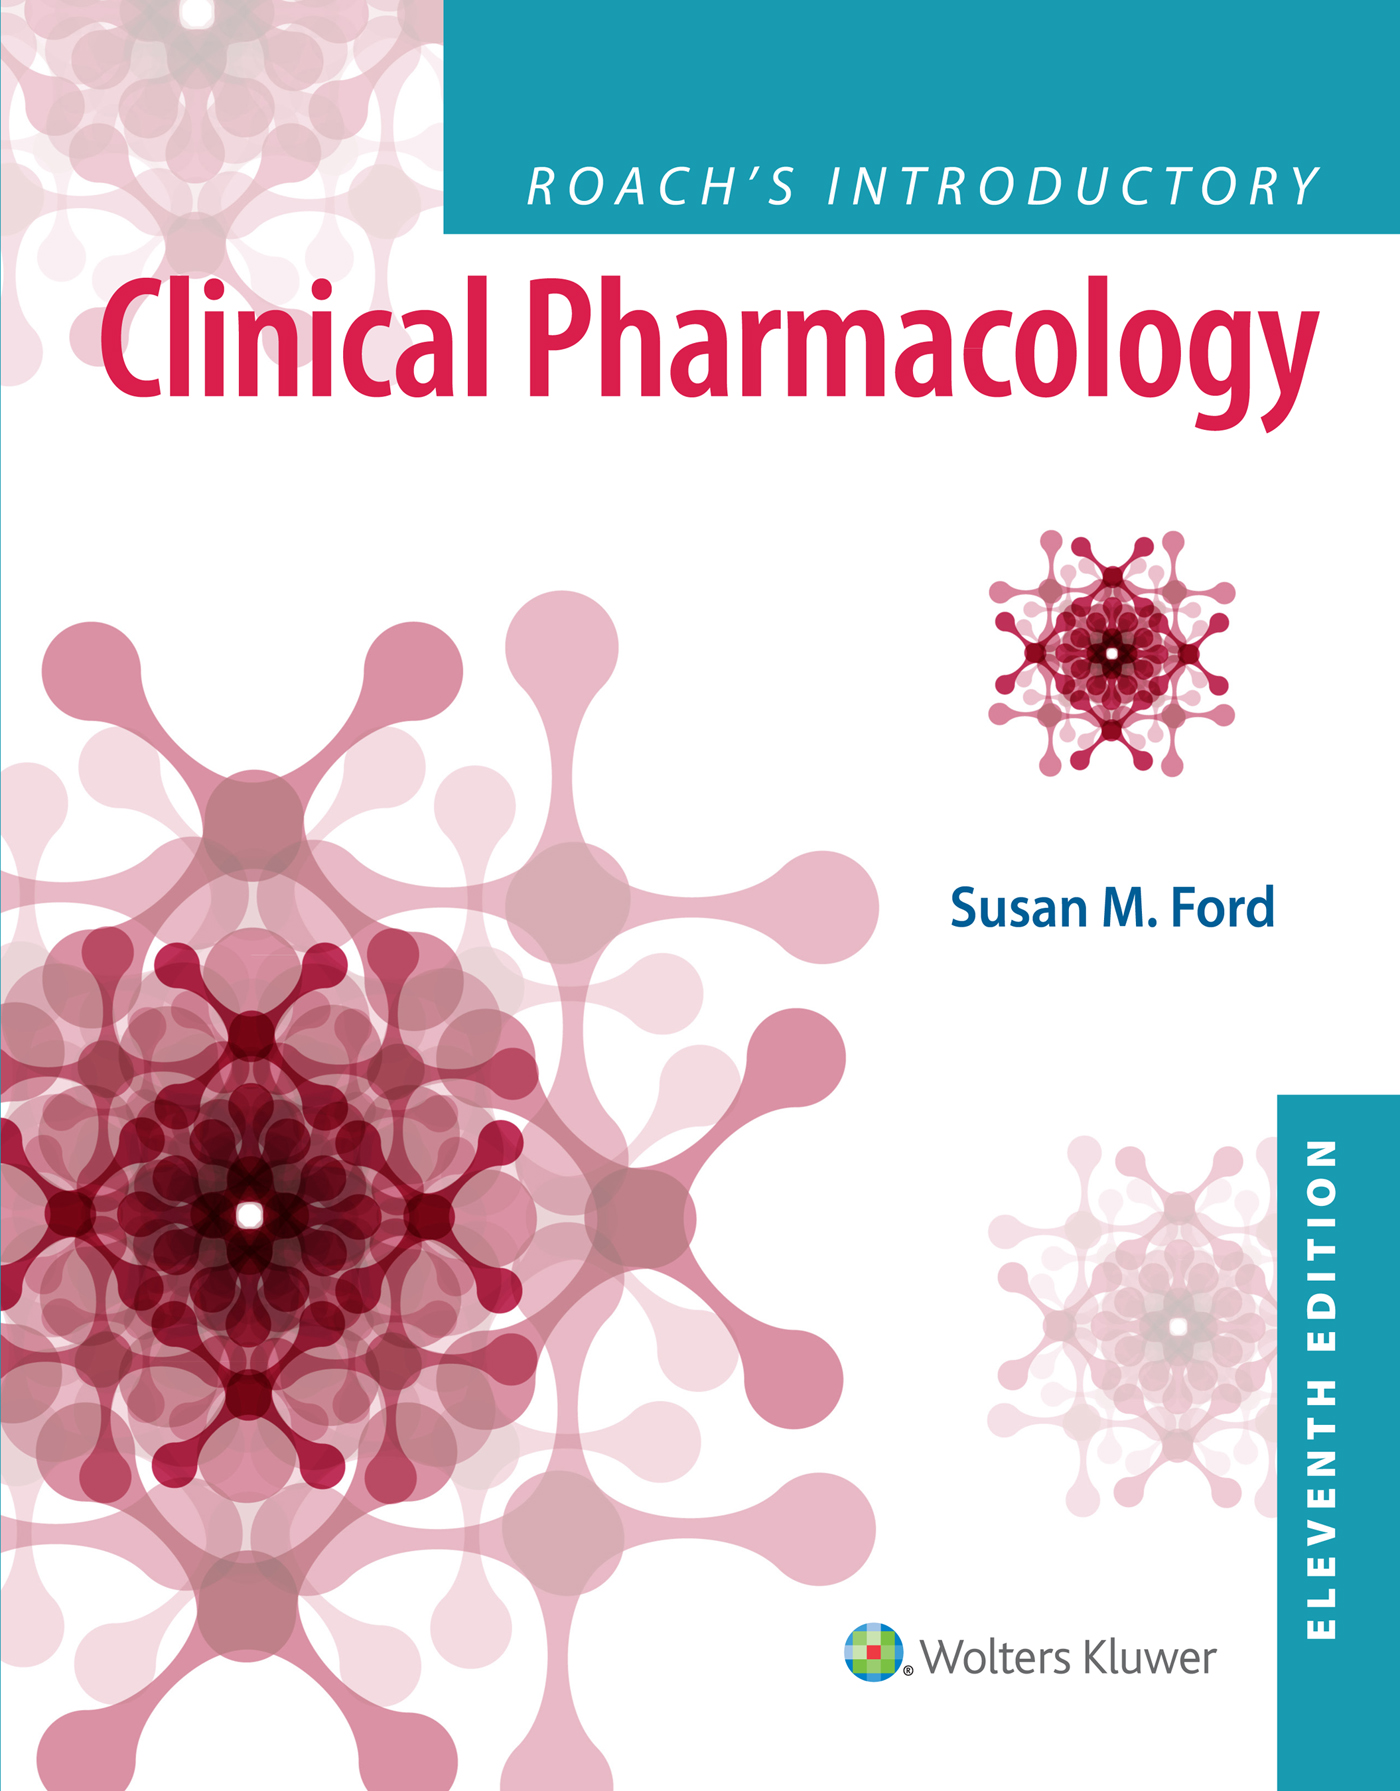 Roach's Introductory Clinical Pharmacology, 11e